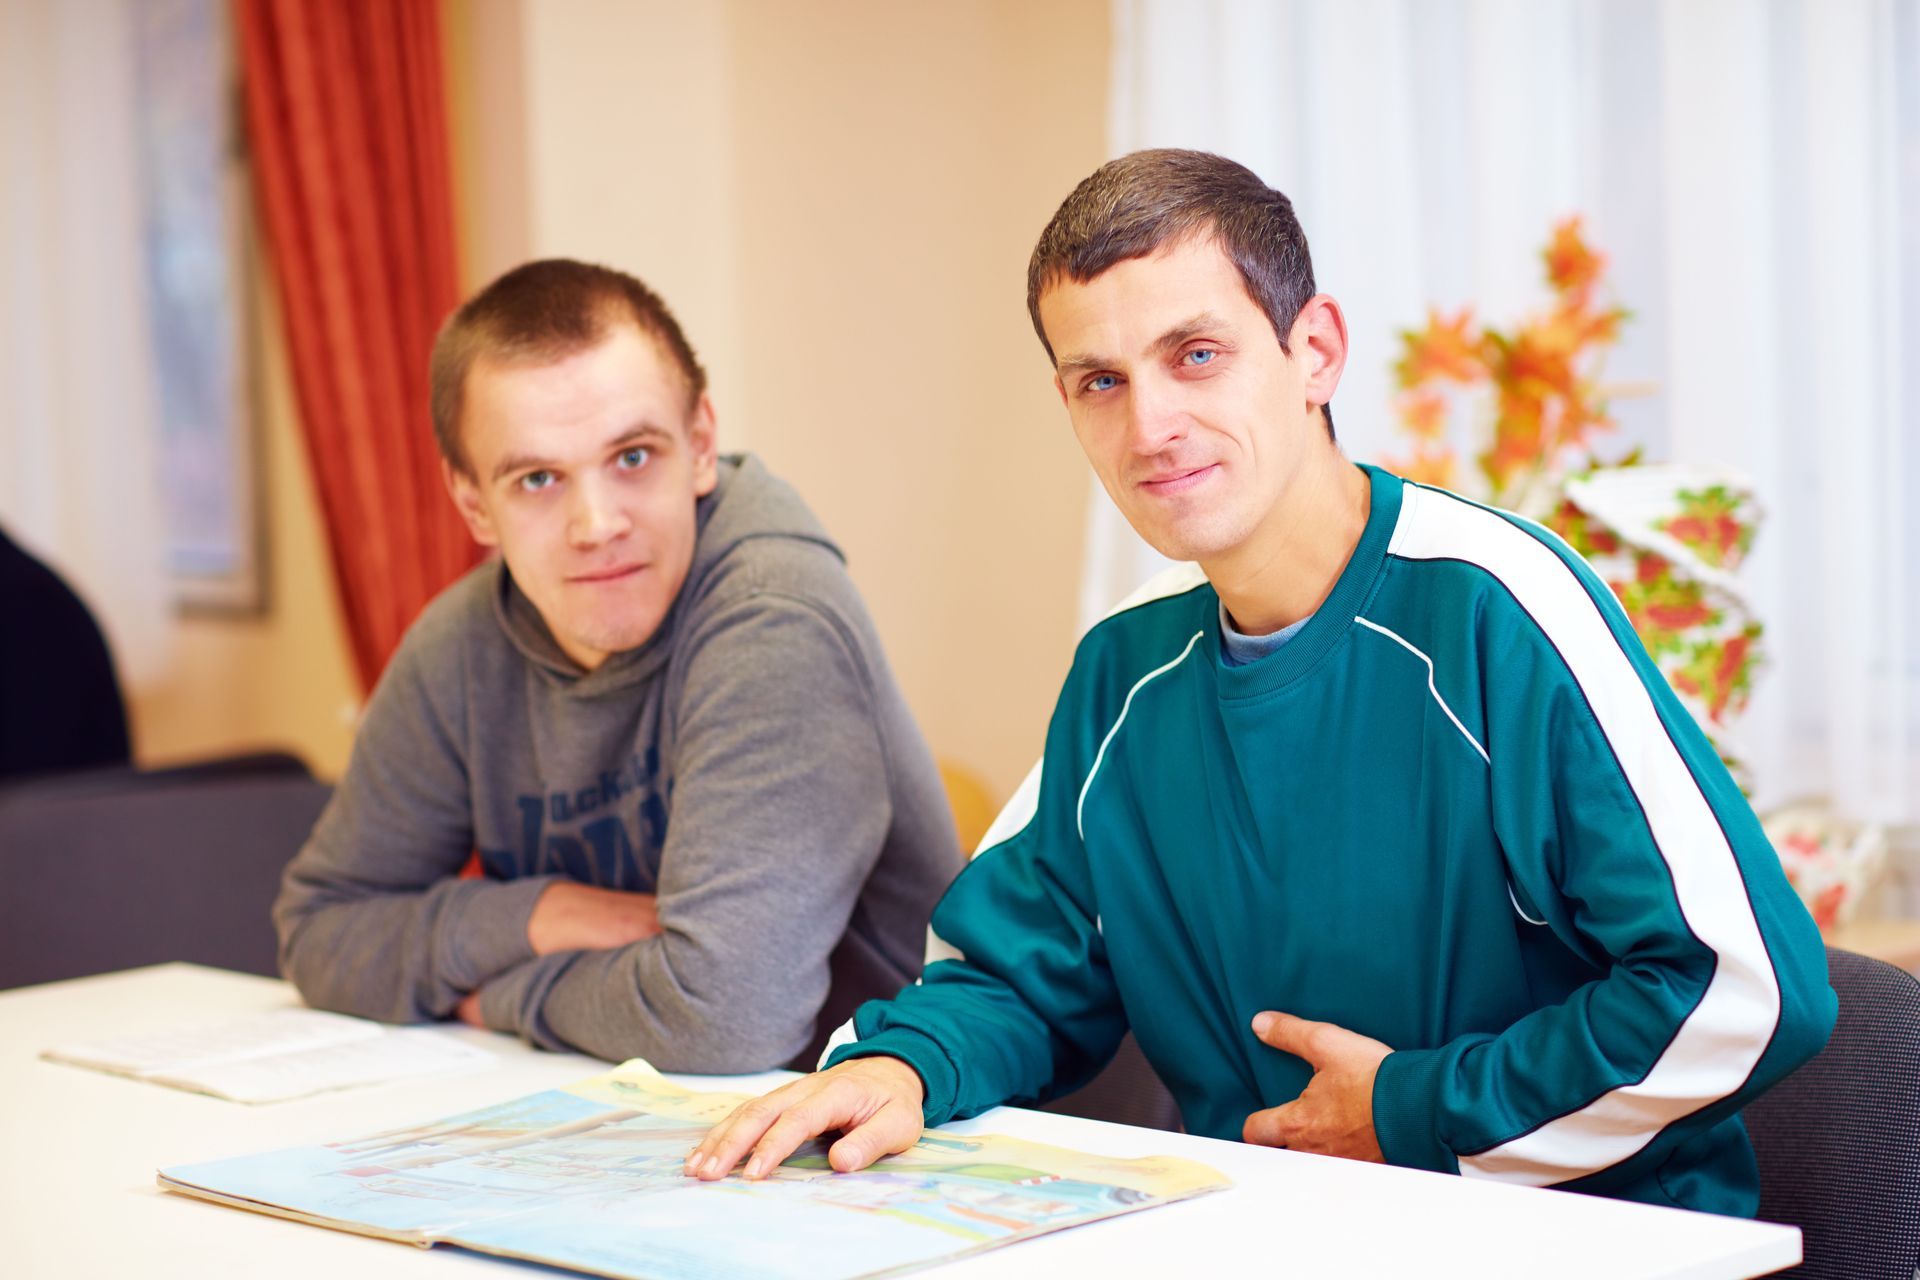 Two young men are sitting at a table looking at a map.